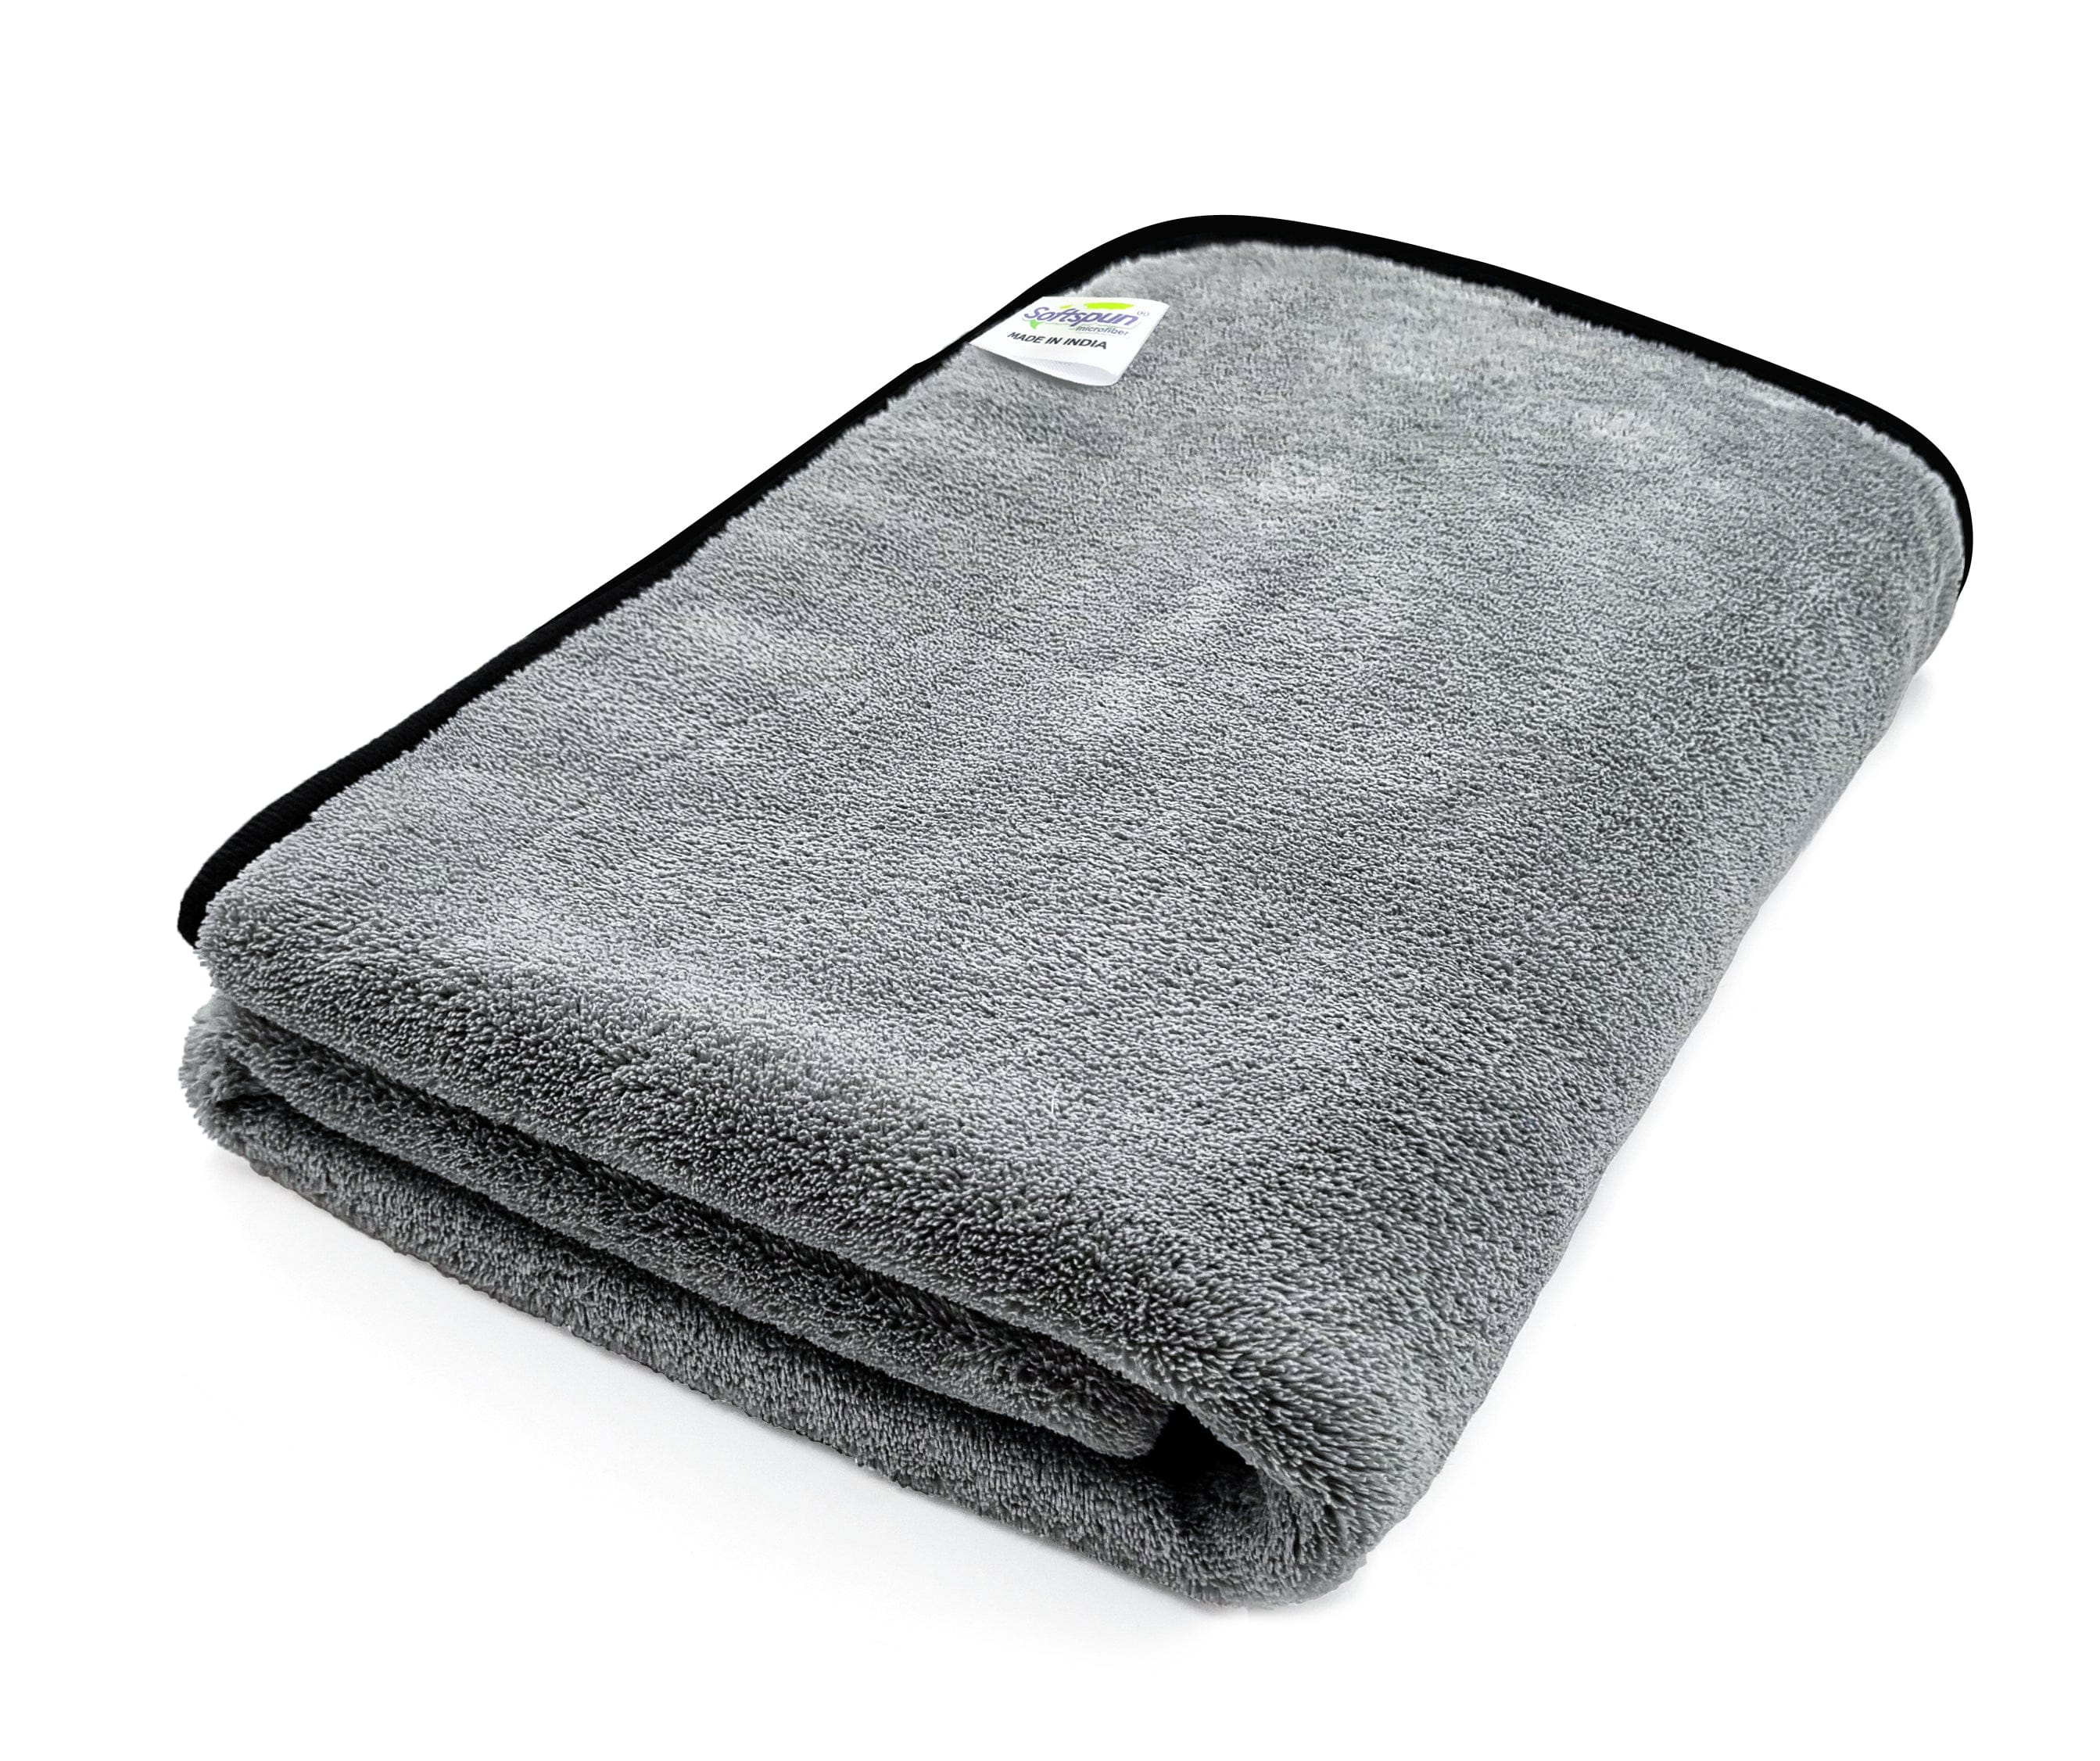 SOFTSPUN Microfiber Bath Towel 1 pc 60x120cm280 GSM Ultra Absorbent Super Soft & Comfortable Quick Drying for Men & Women Daily Use Pack of 1 Extra Large Size Unisex.